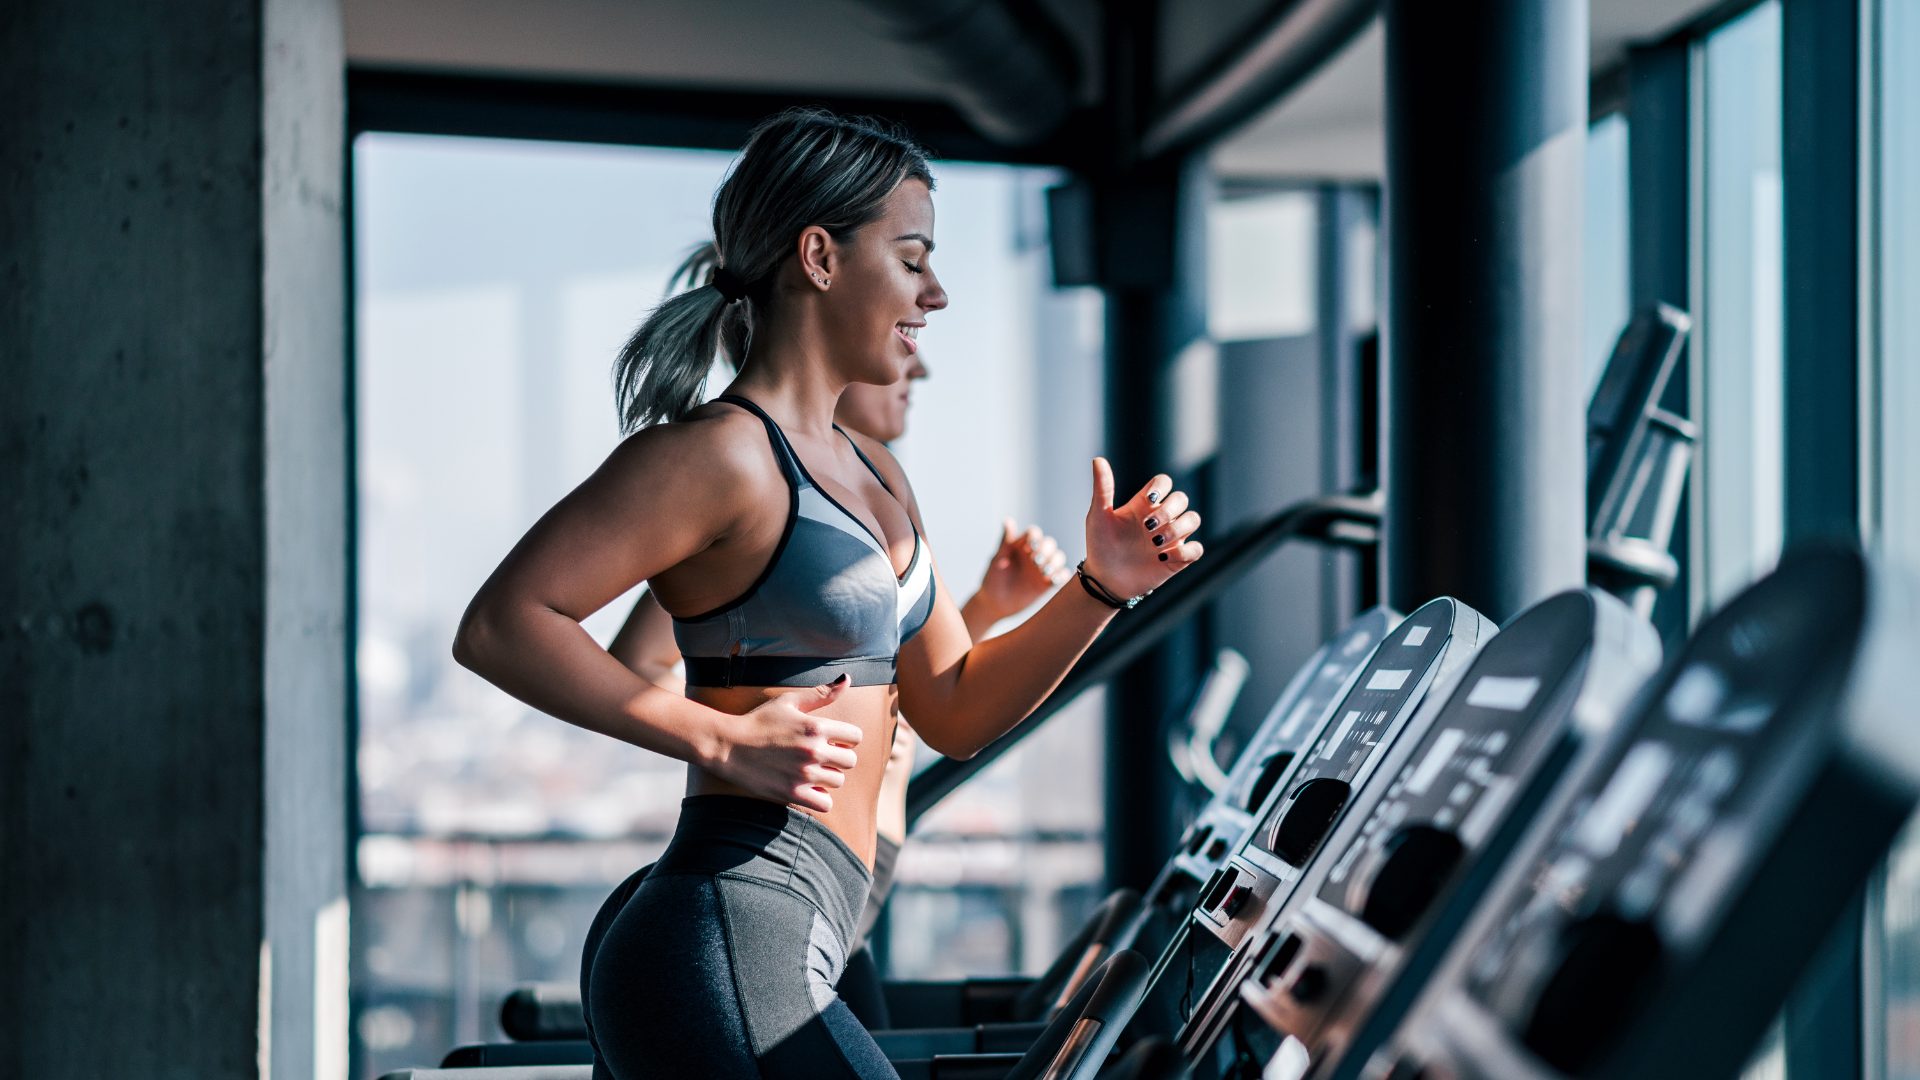 A side view of a women is a grey and black sports bra and shorts running on a treadmill burning calories